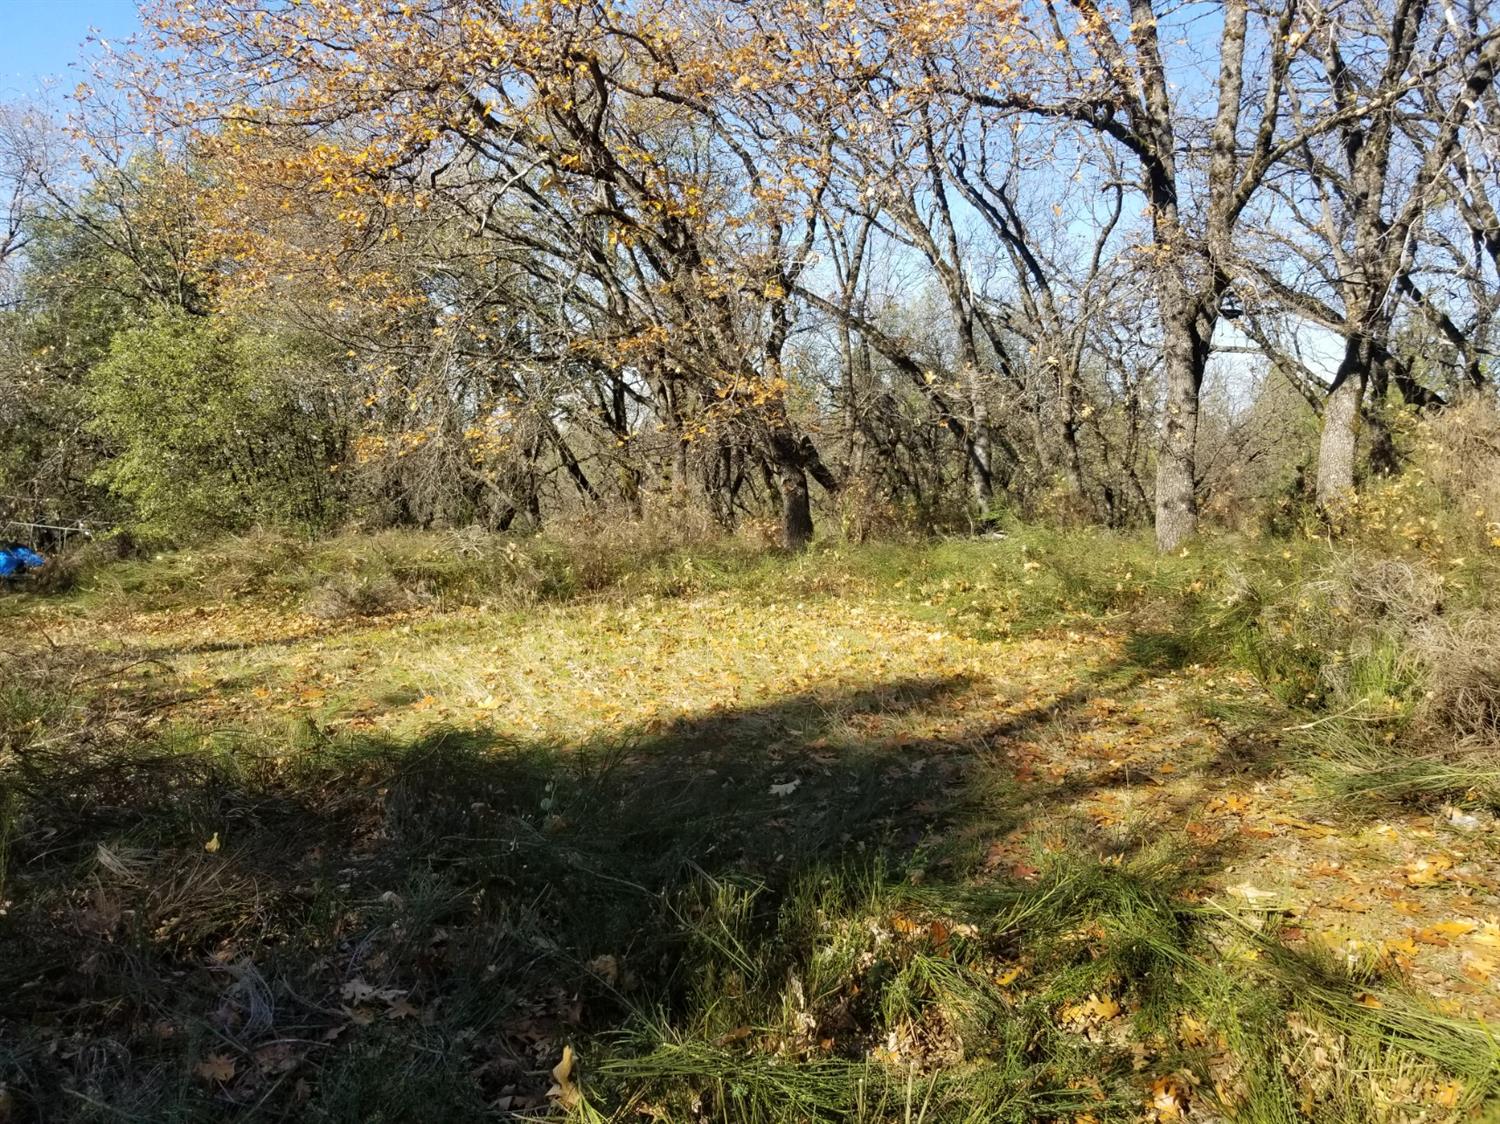 Knoll Top Property in Eden Valley. 3-acre wooded parcel in Eden Valley surrounded by High End Homes. Remove some trees & expose long-range views for your dream home. Well and electricity are in & septic tests dated from 1990. Come see this awesome opportunity!